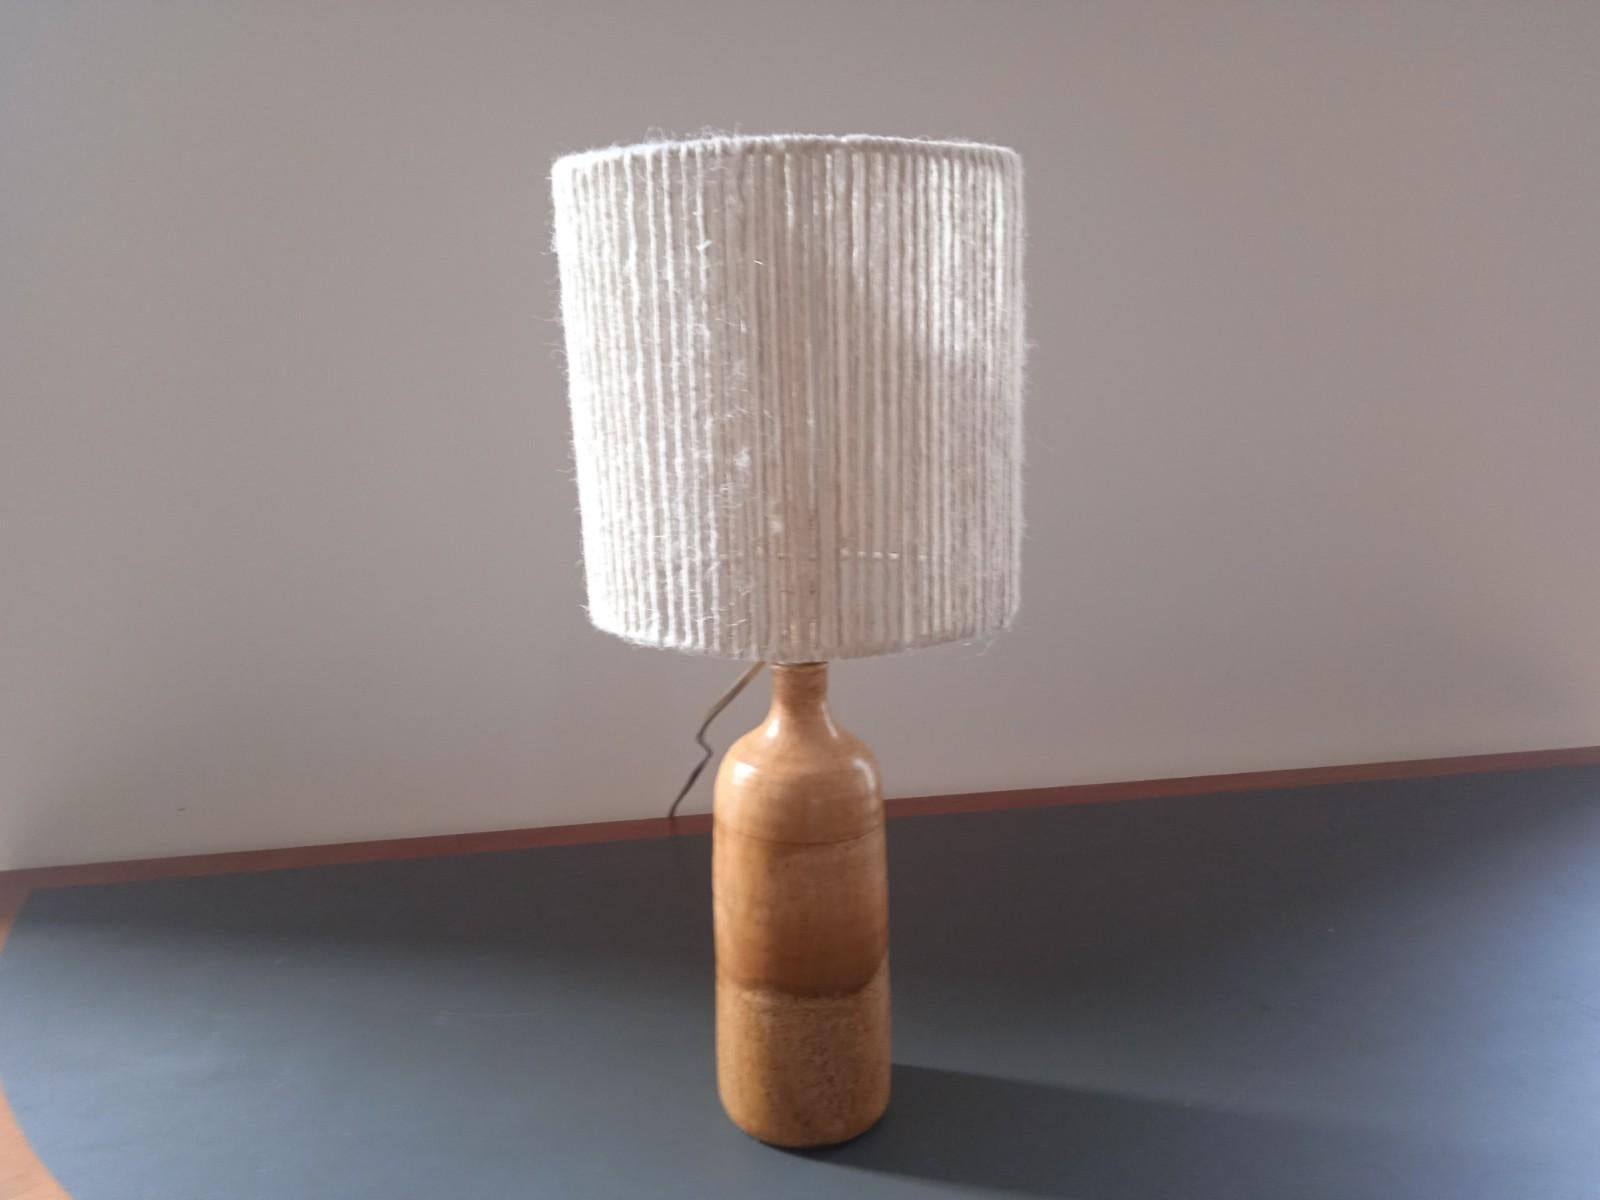 Mid-centrury french ceramic table lamp with lampshade in rope.
New rope lampeshade.

Measures: Lampshade : H 21 x D 20 cm
ceramic : H 10 x D 9 cm.